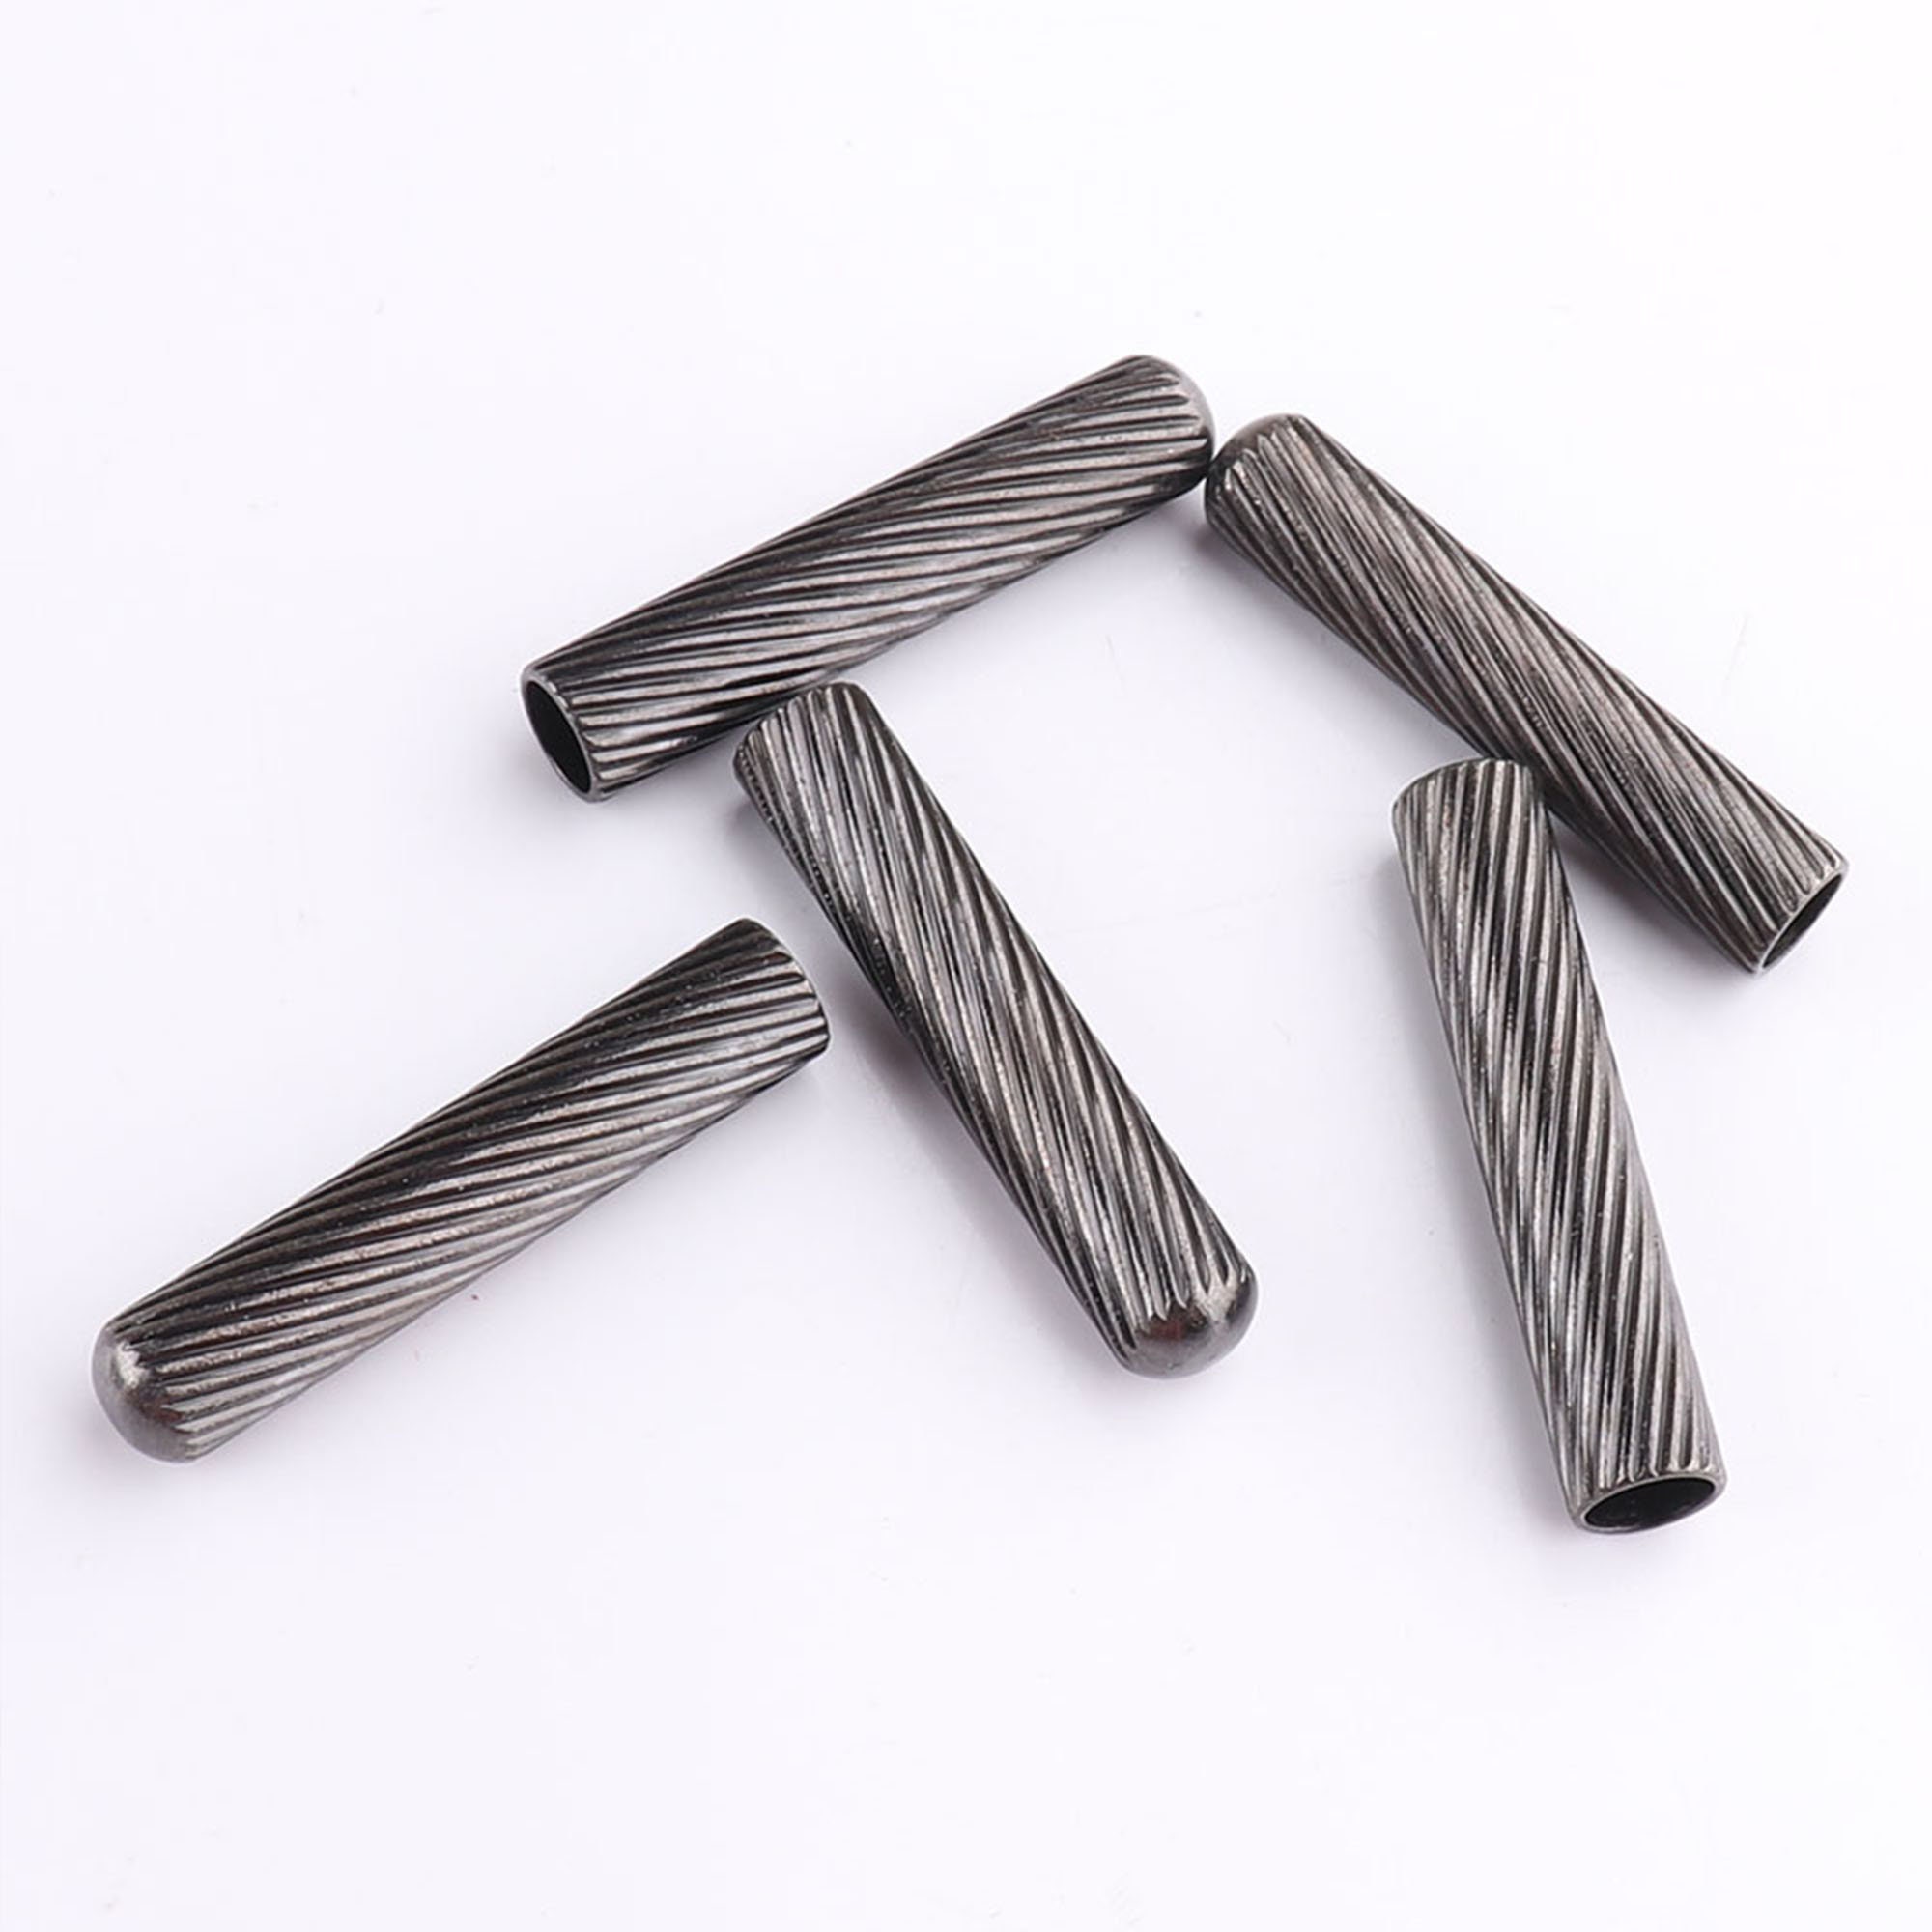 4pcs Silver Metal AGLETS TIPS for AIR  STYLE Shoe Lace SCREW On NO GLUE 